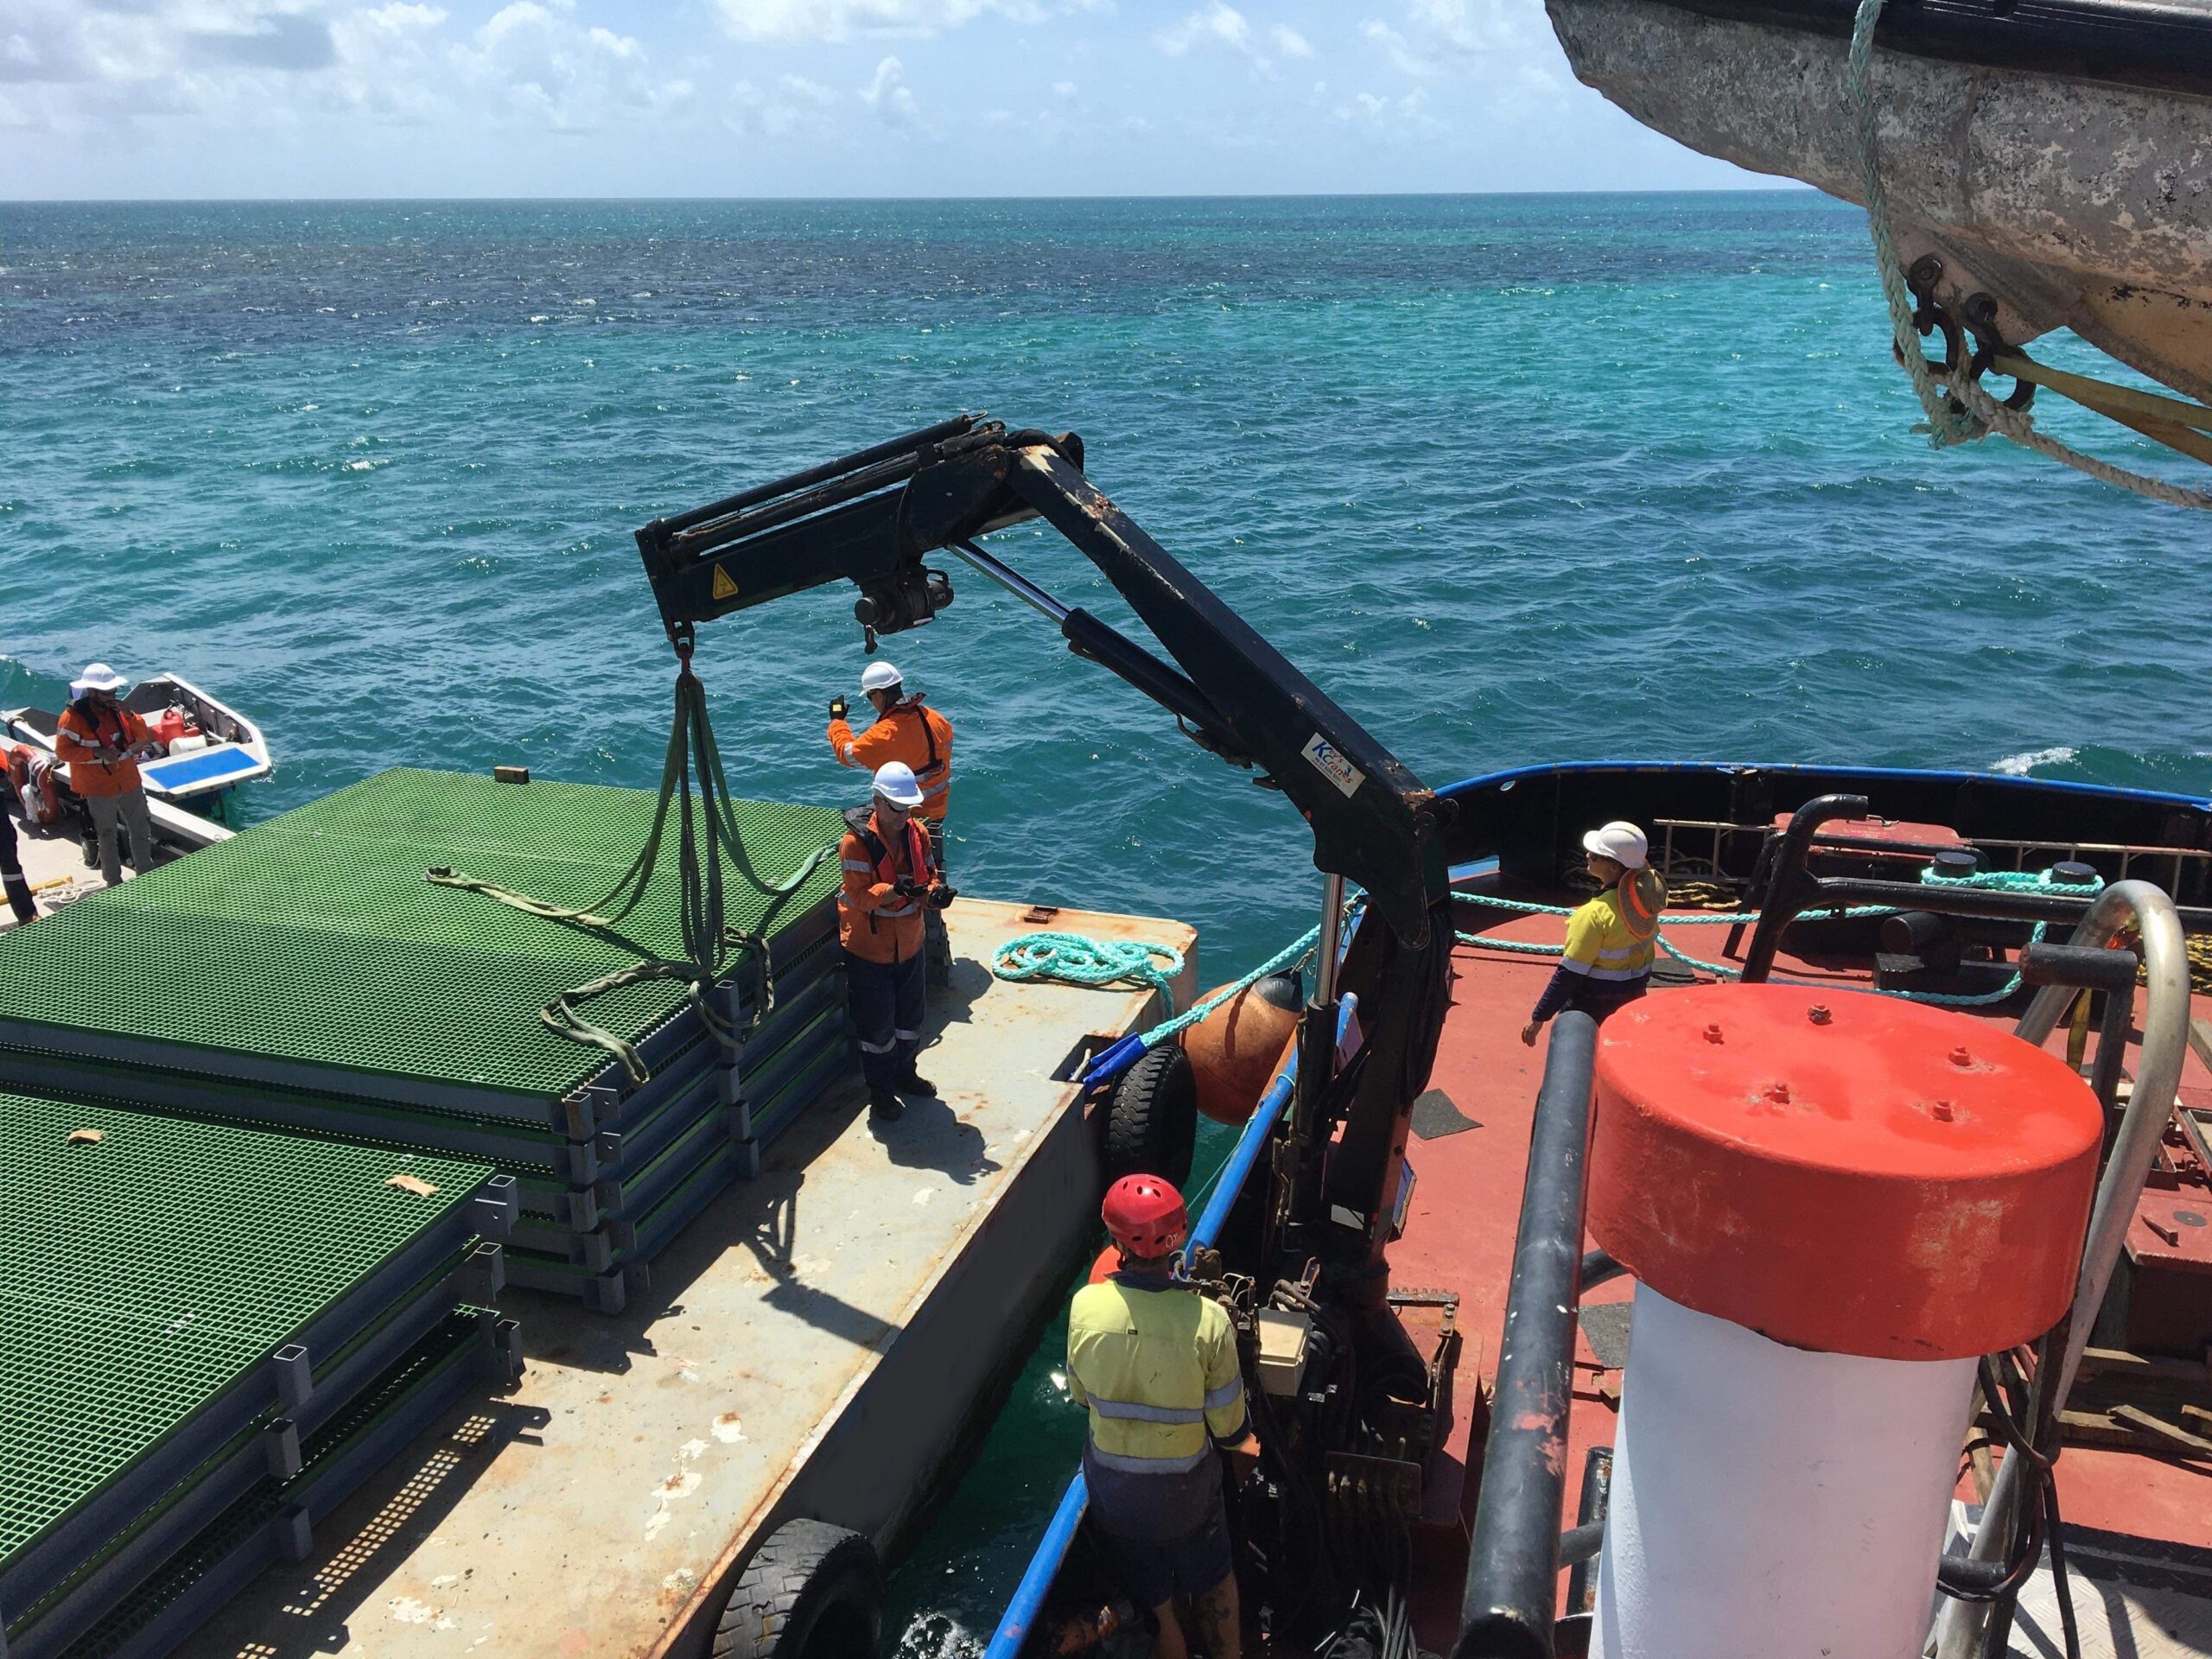 Jetty Refurbishment at Green Island, Great Barrier Reef – Marine Infrastructure Project Support